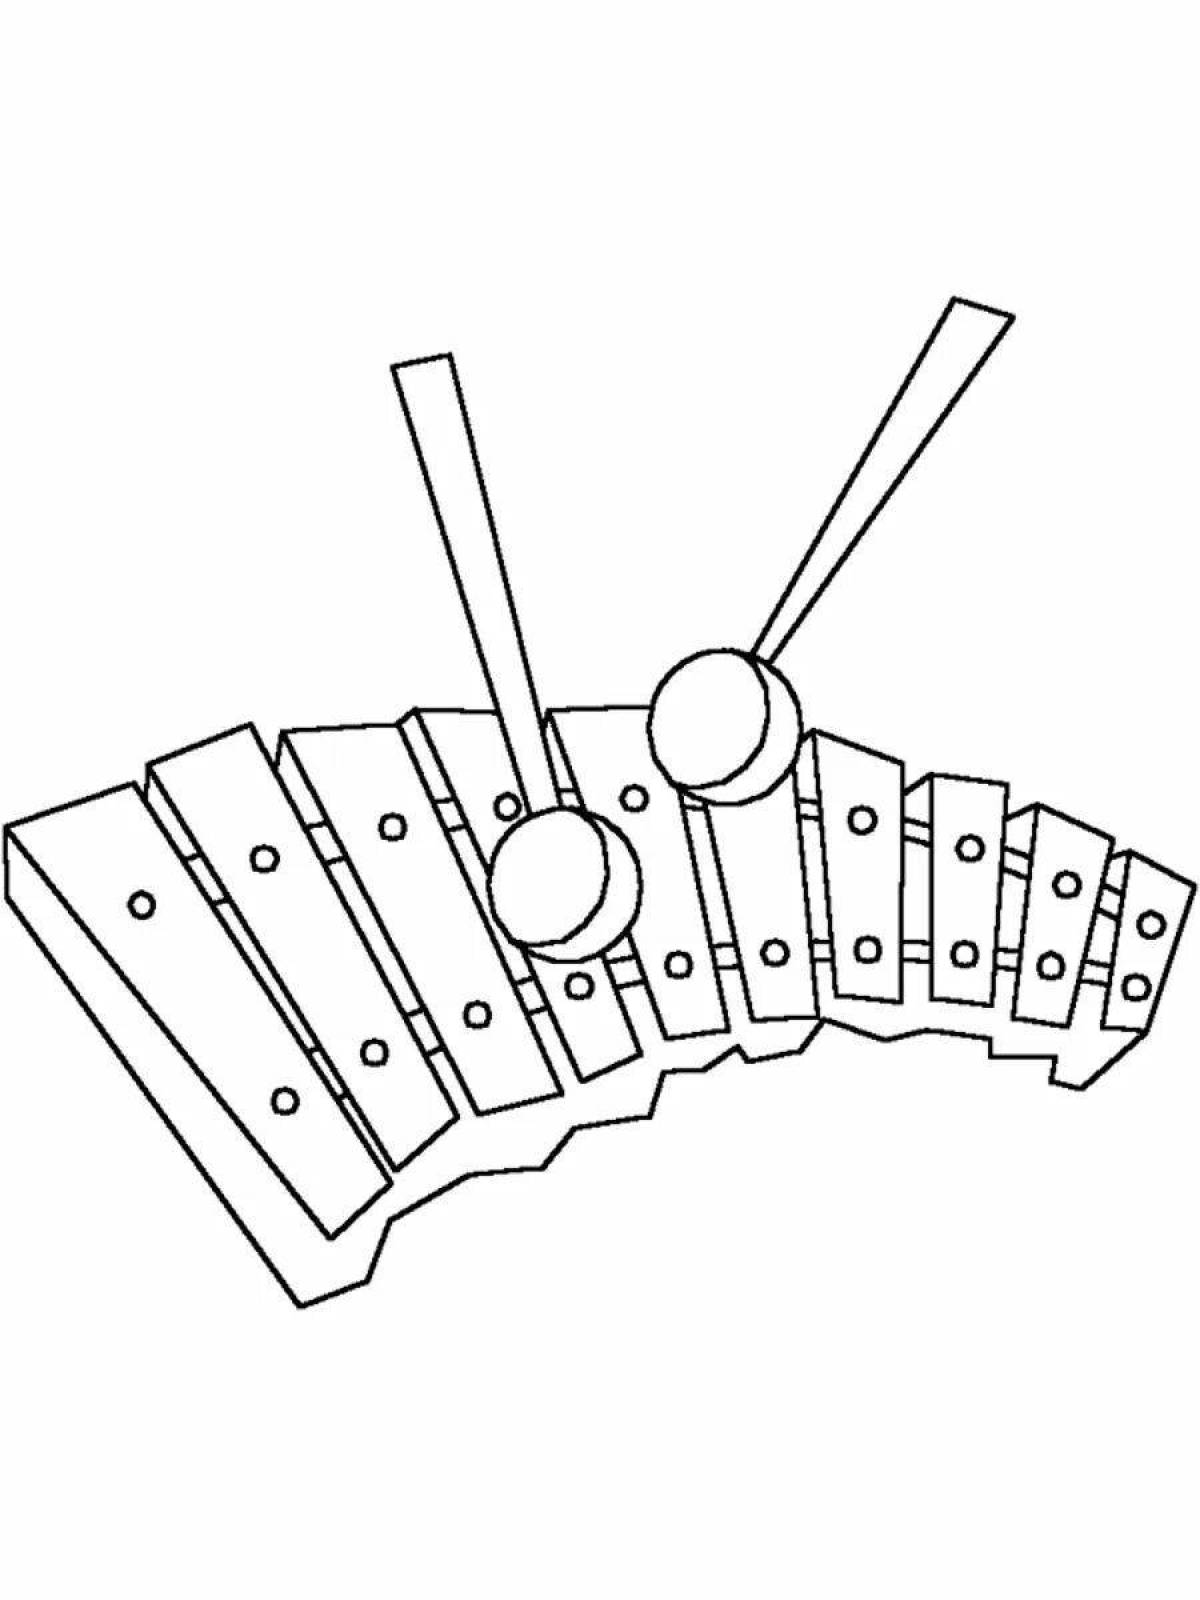 Great xylophone coloring book for kids